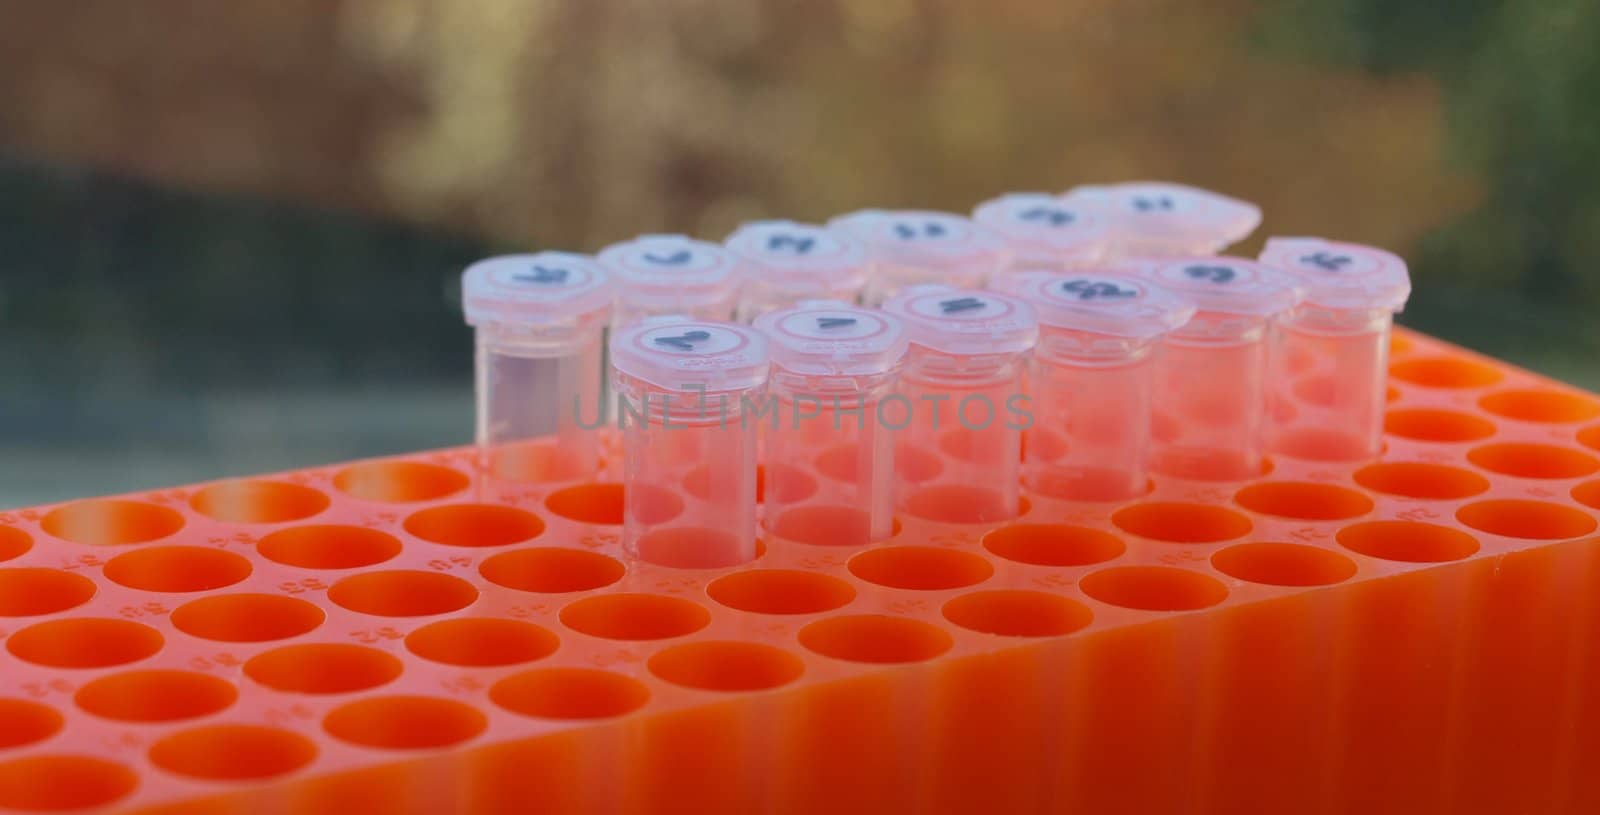 Experimental test tubes in a orange rack with green background